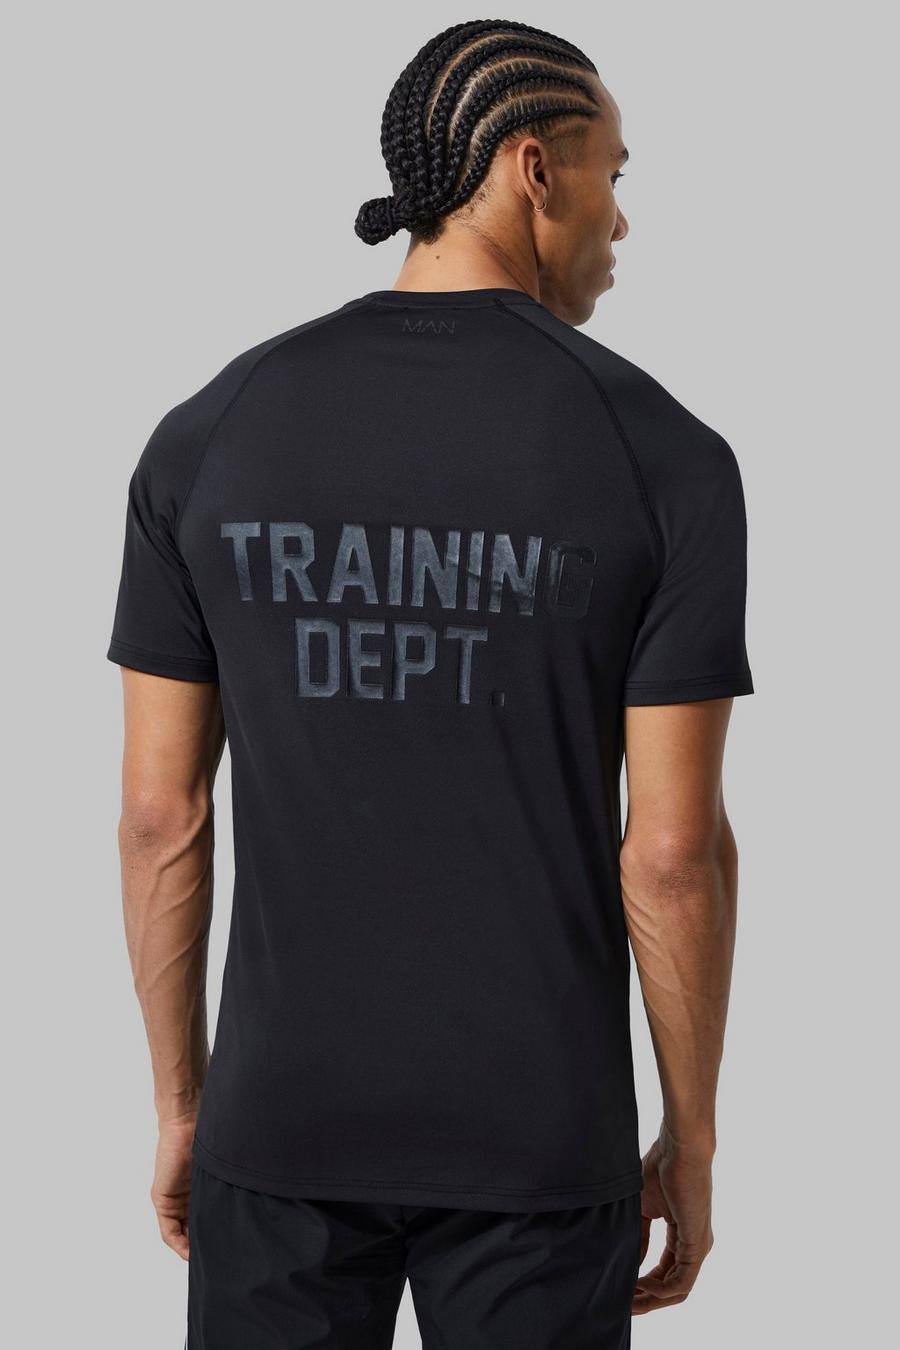 Black negro Tall Man Active Training Dept Muscle Fit T-shirt